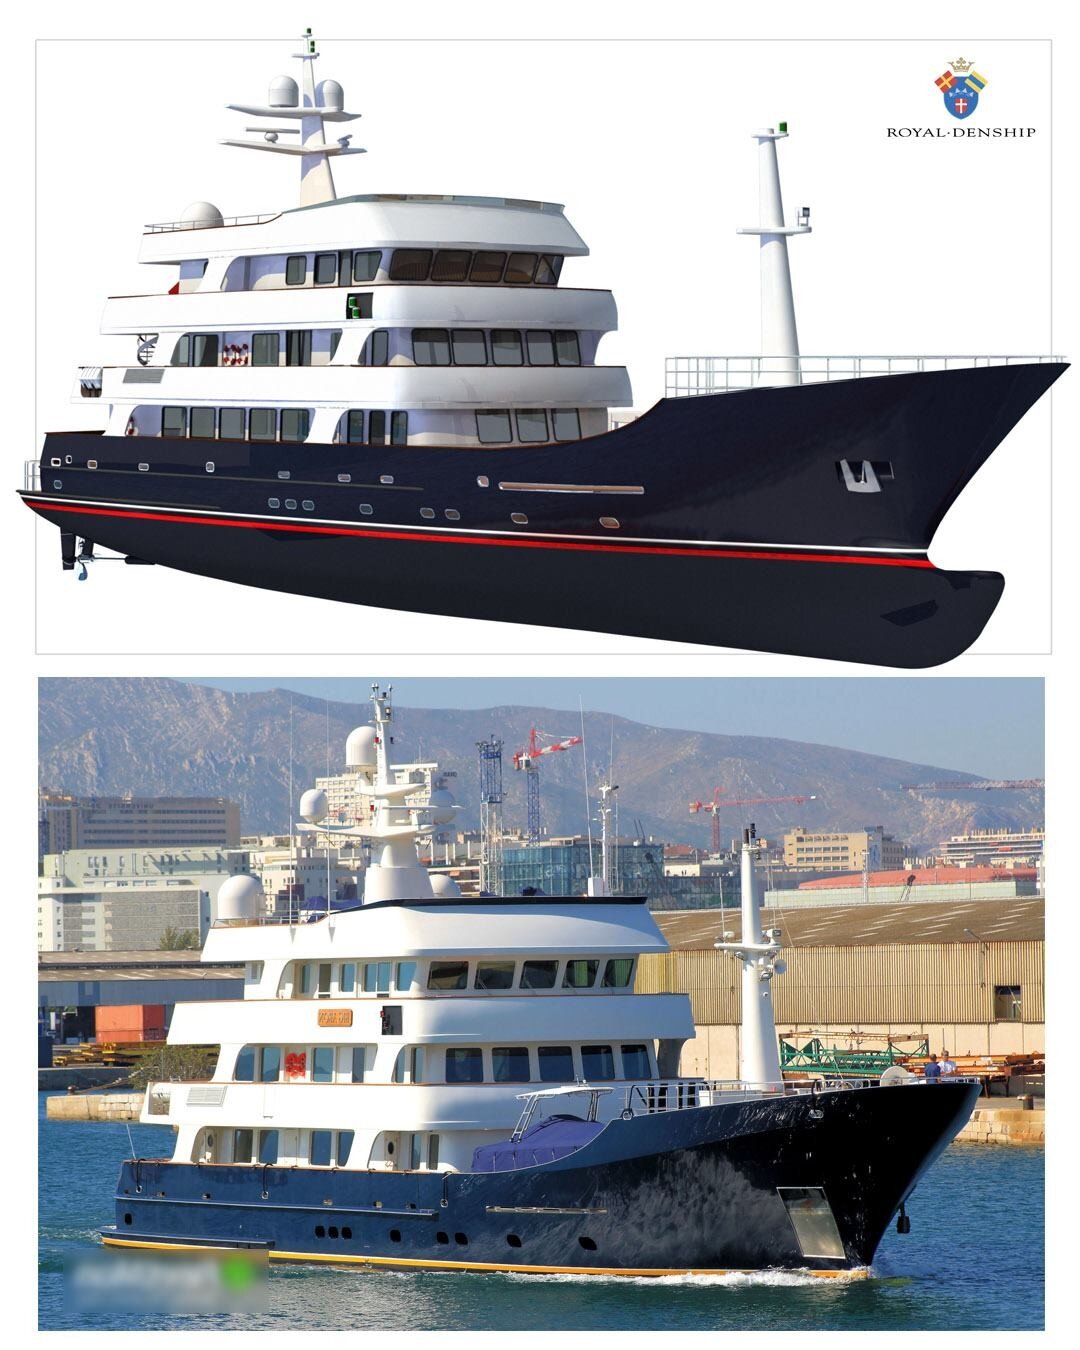 Rendering from 2003!!!! versus completed project a year later. This is our #throwbackthursday BTW, What do you think? This 153' expedition yacht is the baby sister of the 206' Royal Denship that was recently sold to Bernie Ecclestone, billionaire ex-